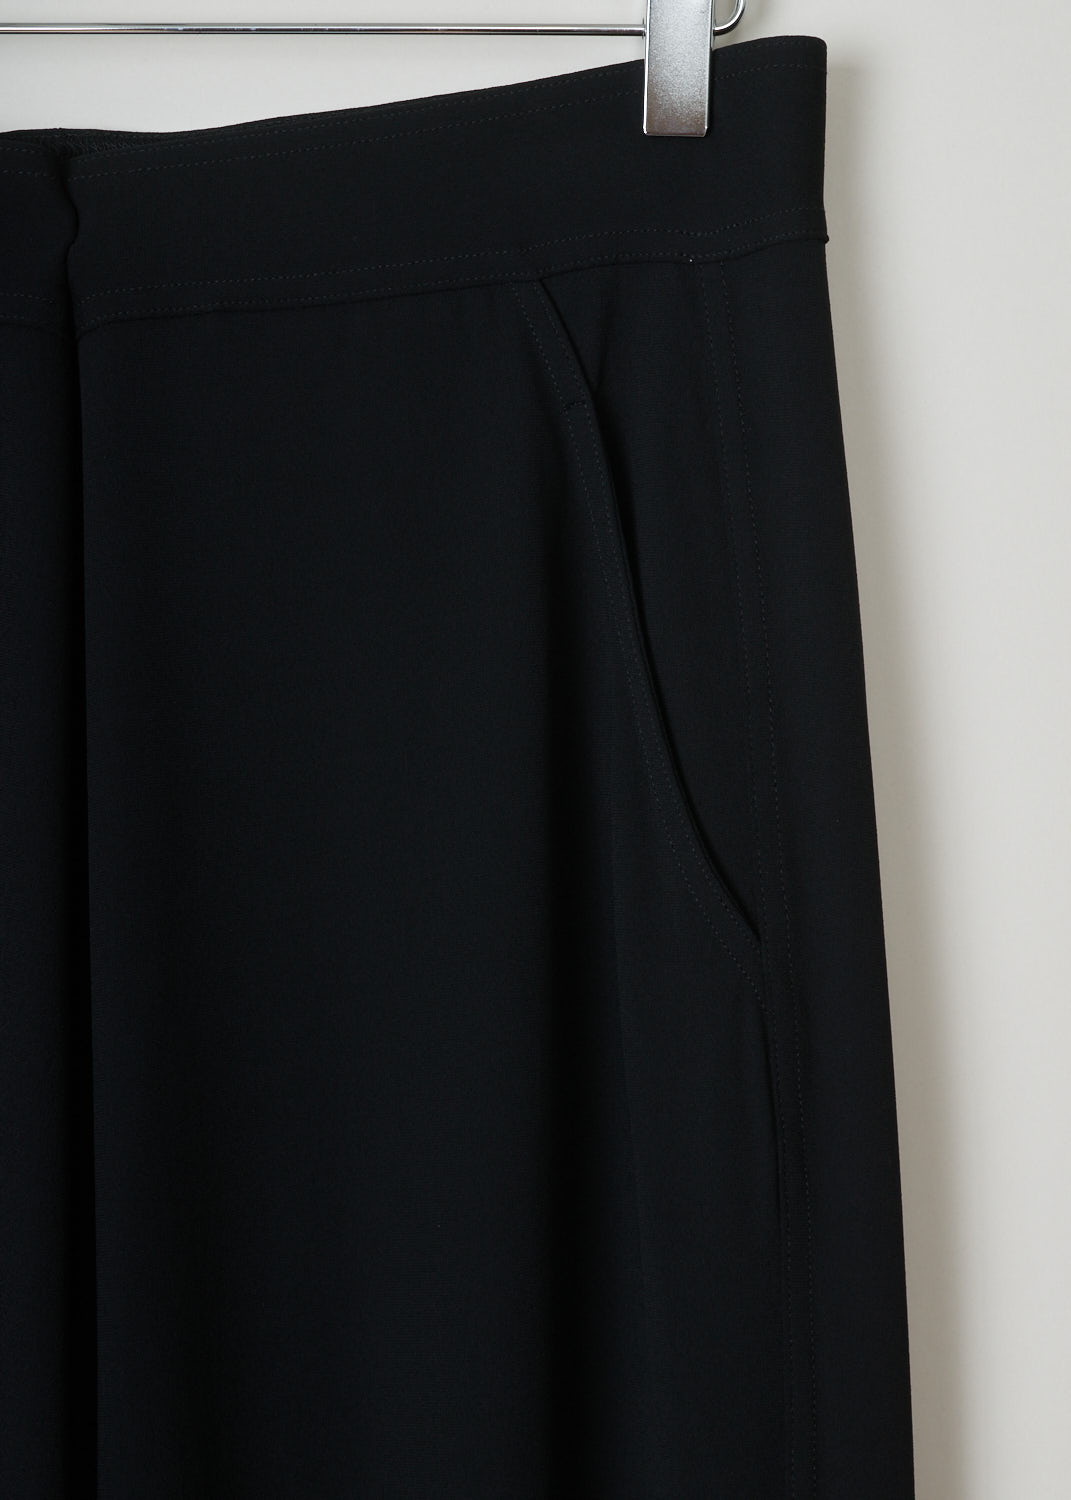 Donna Karan, Loose fit black stretch pants, A99P509J43_001_black, black, detail, Comfy black pants, sits high and fitted on the waist, with a loose fit throughout the legs. Made from a thin airy fabric which contains a high stretch factor for that extra bit of comfort. Comes with forward slanted slip in pockets. No fastening option available on this model.  